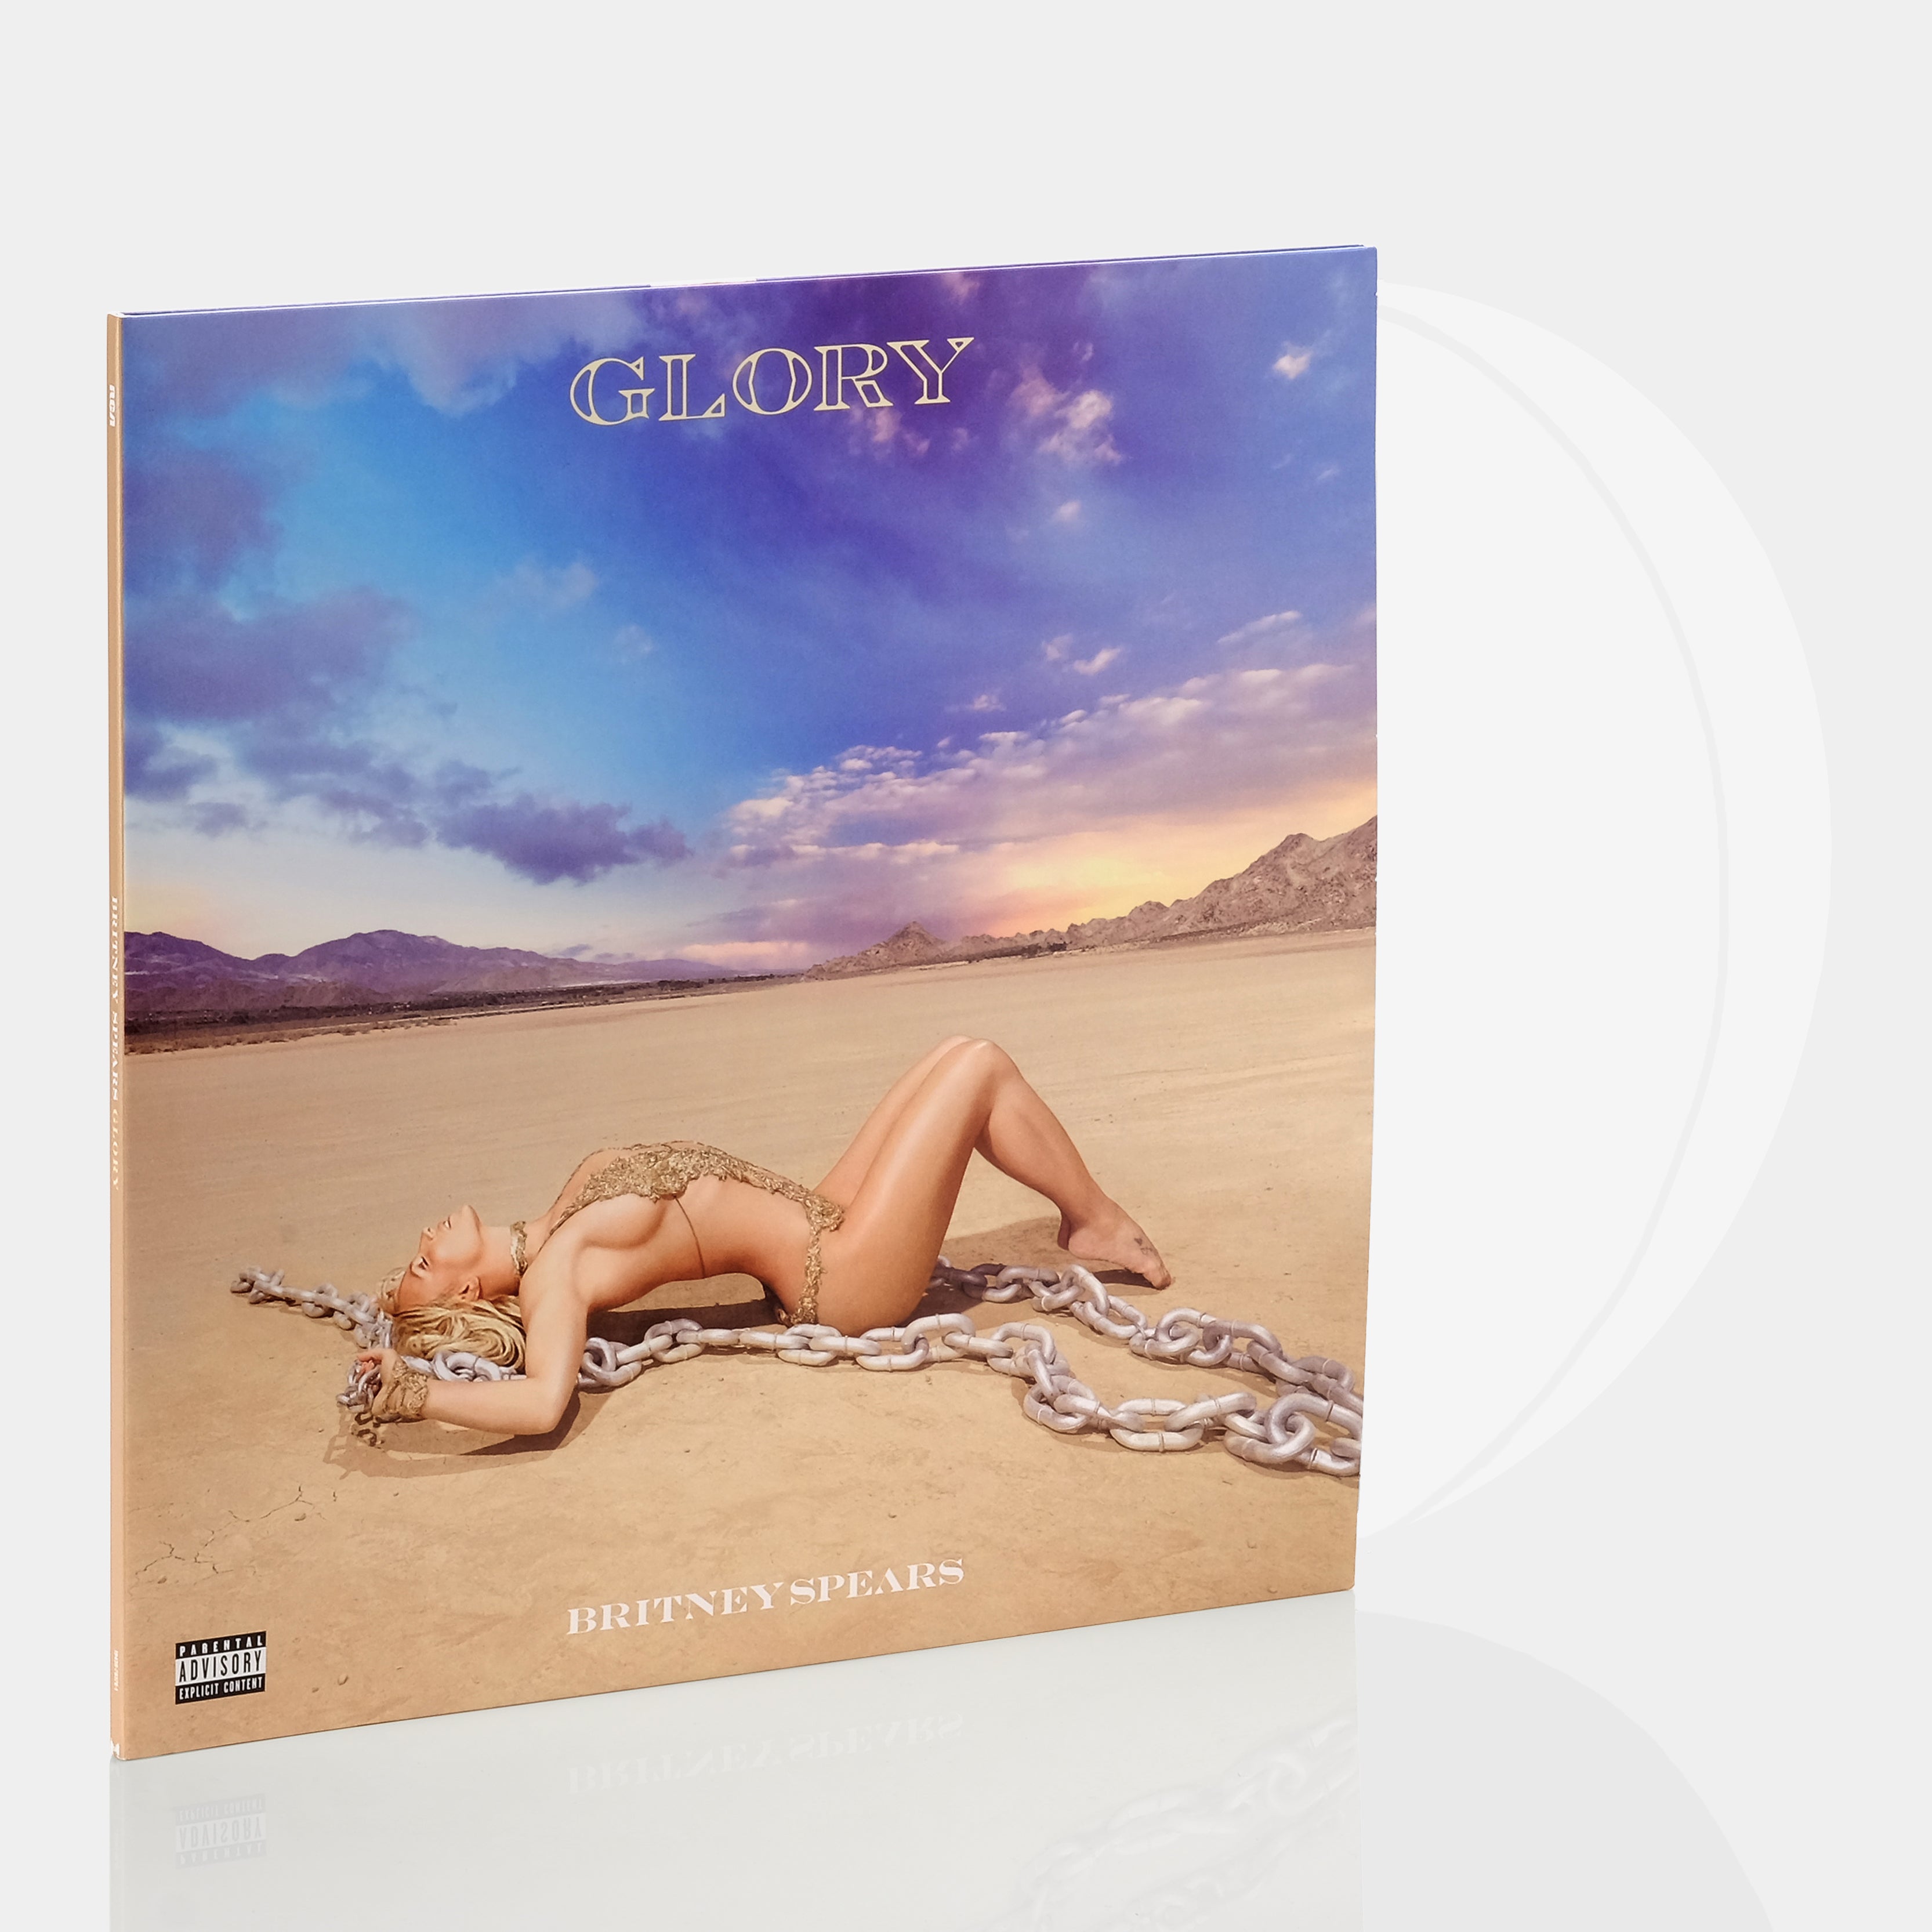 Britney Spears - Glory (Limited Edition Deluxe) 2xLP White Vinyl Record